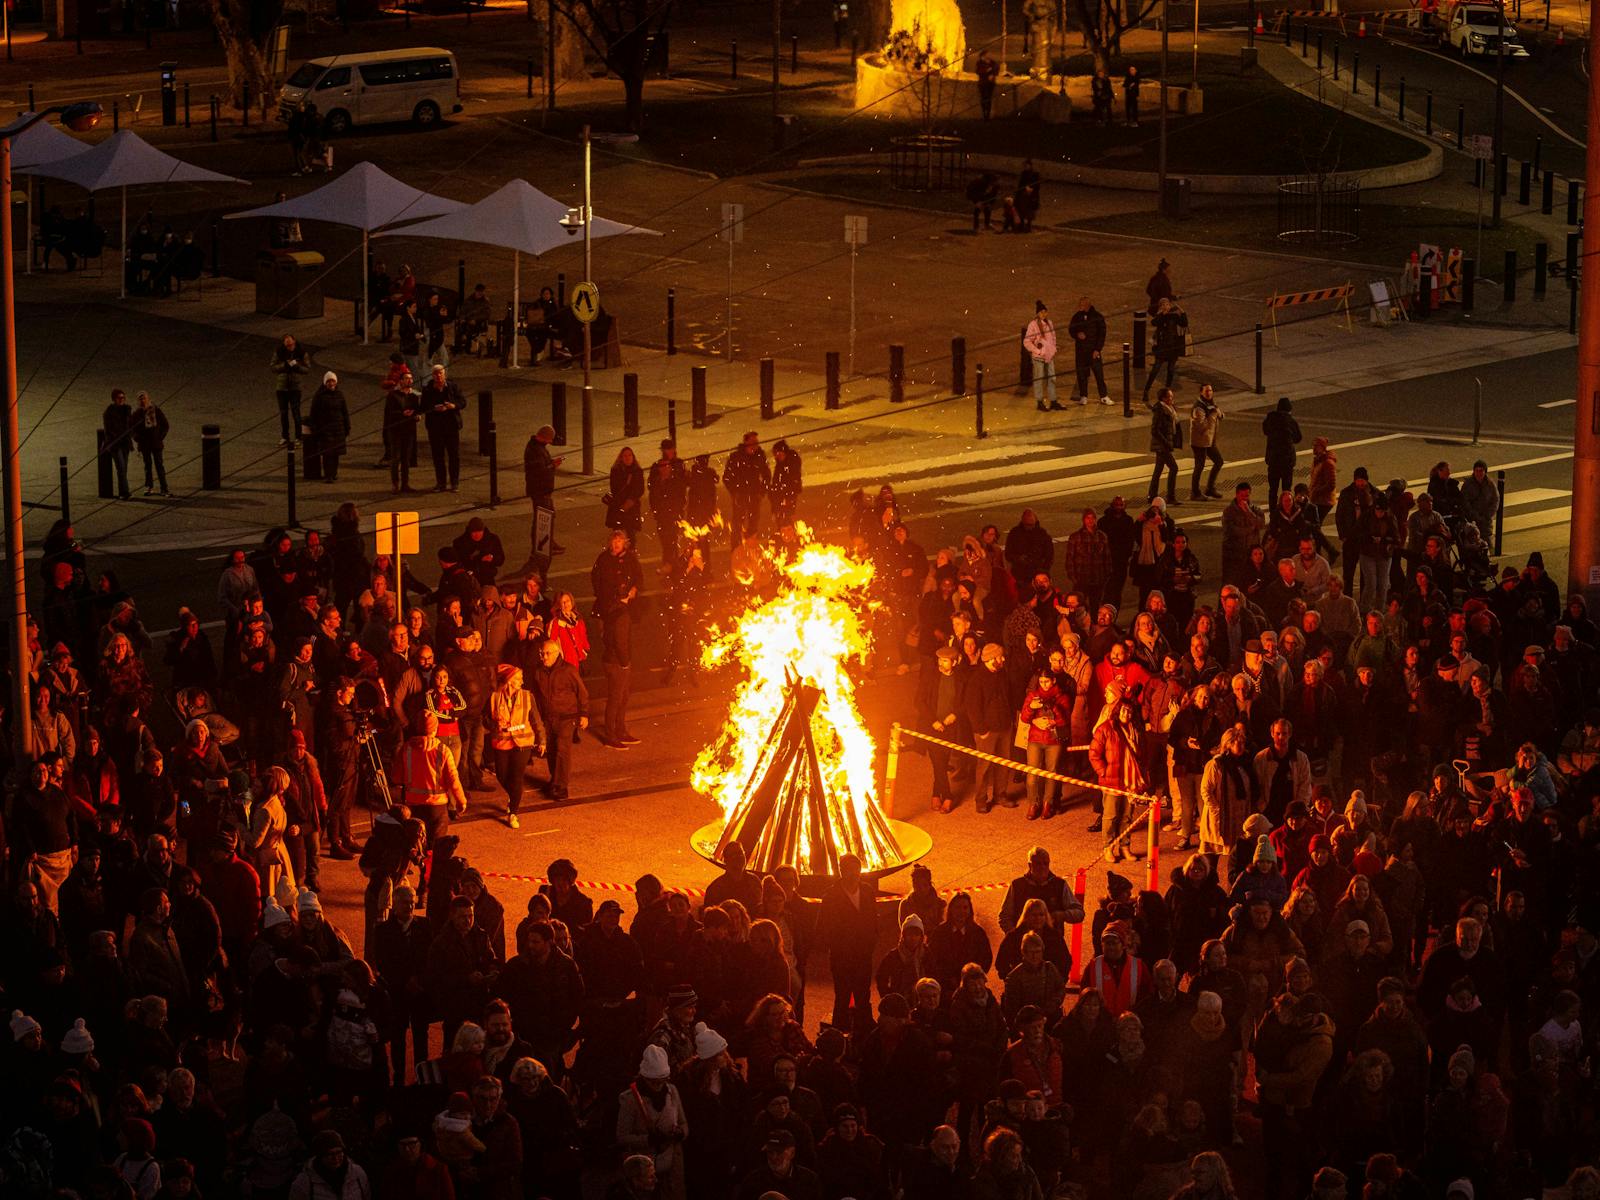 A colour photograph at nighttime with a large bonfire shining bright with people circled around